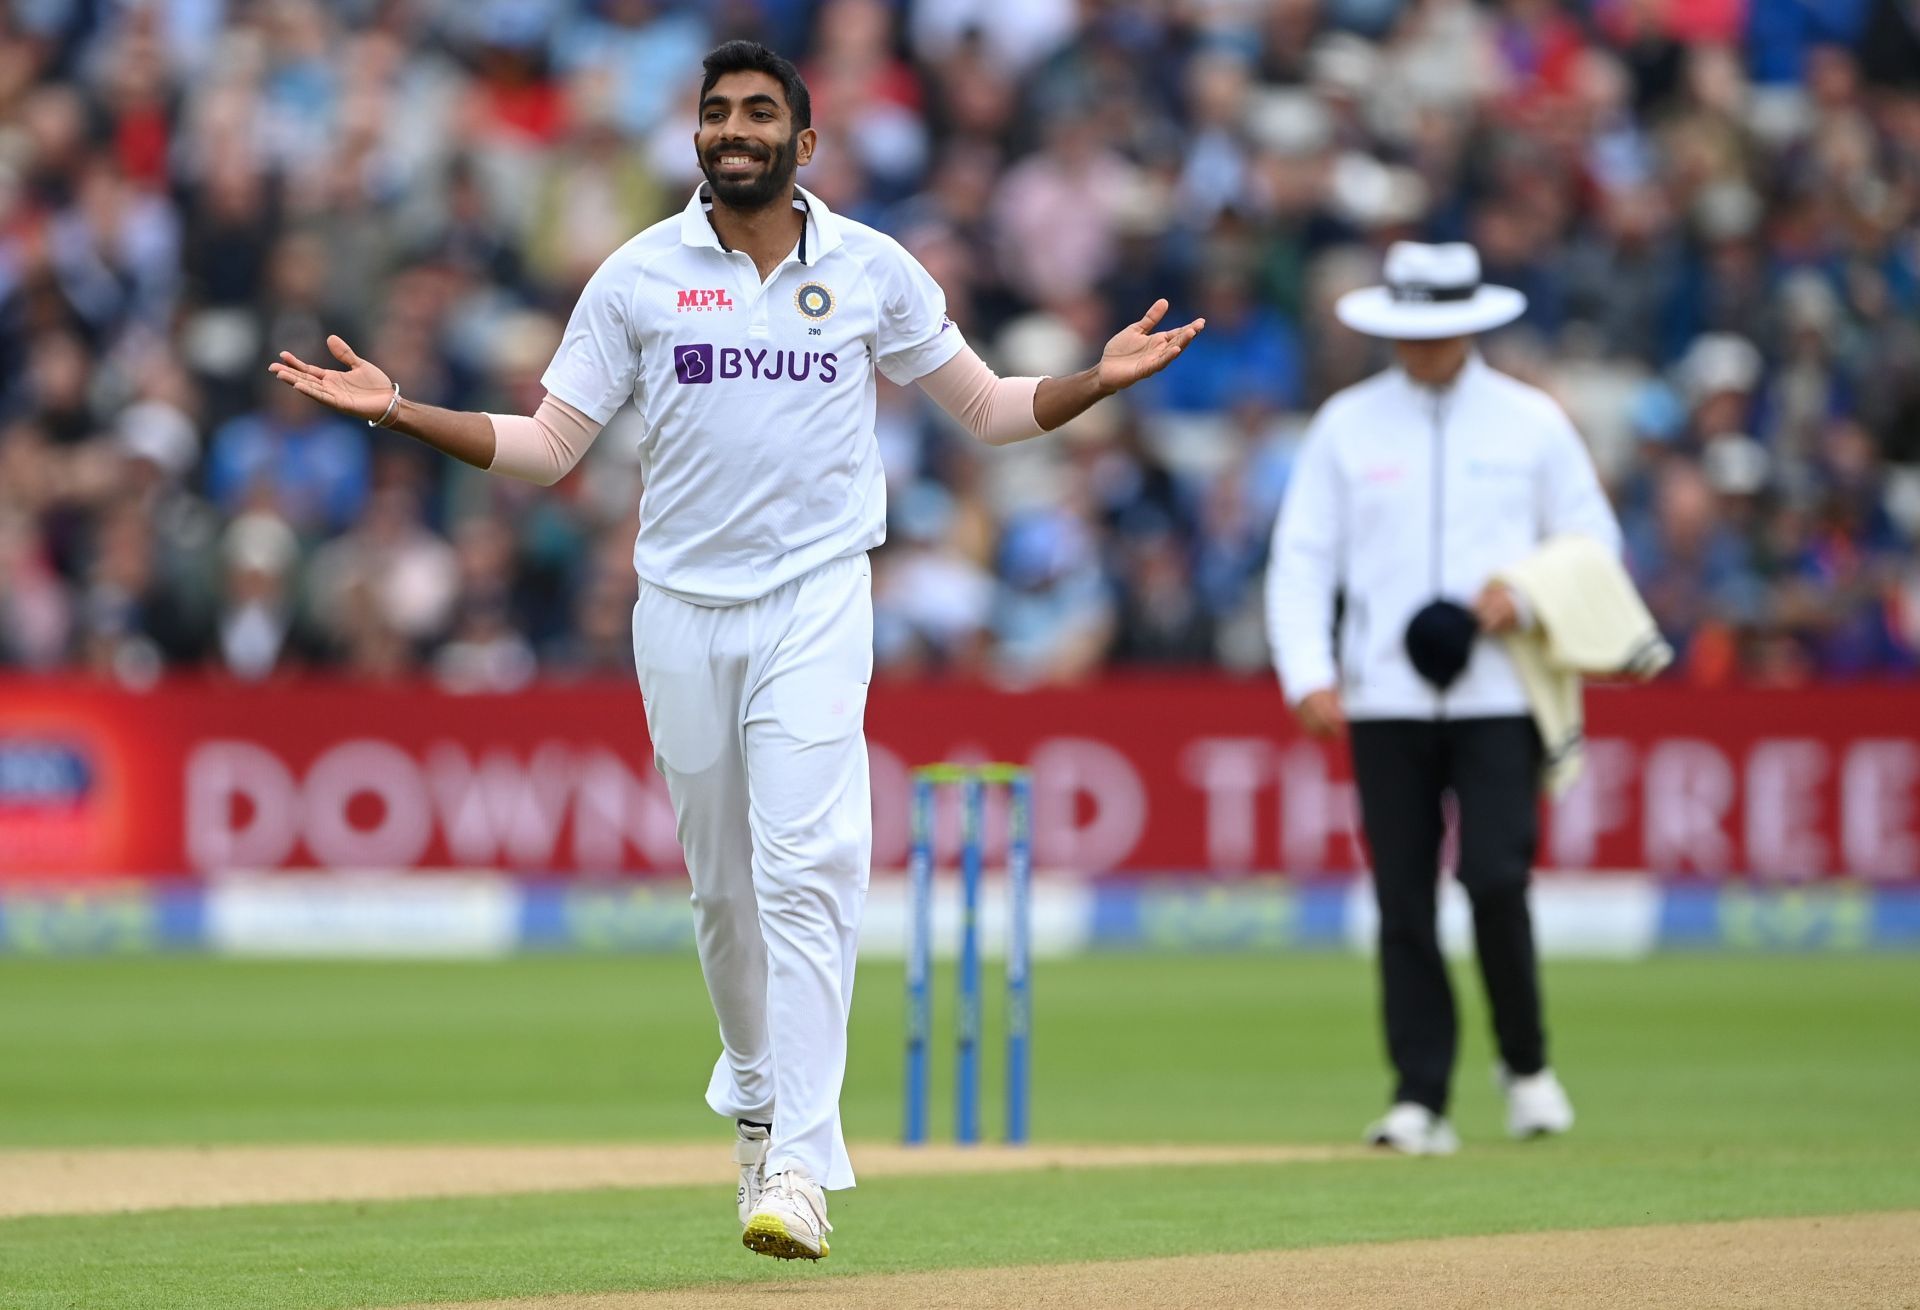 Bumrah is leading a punch of potent seamers